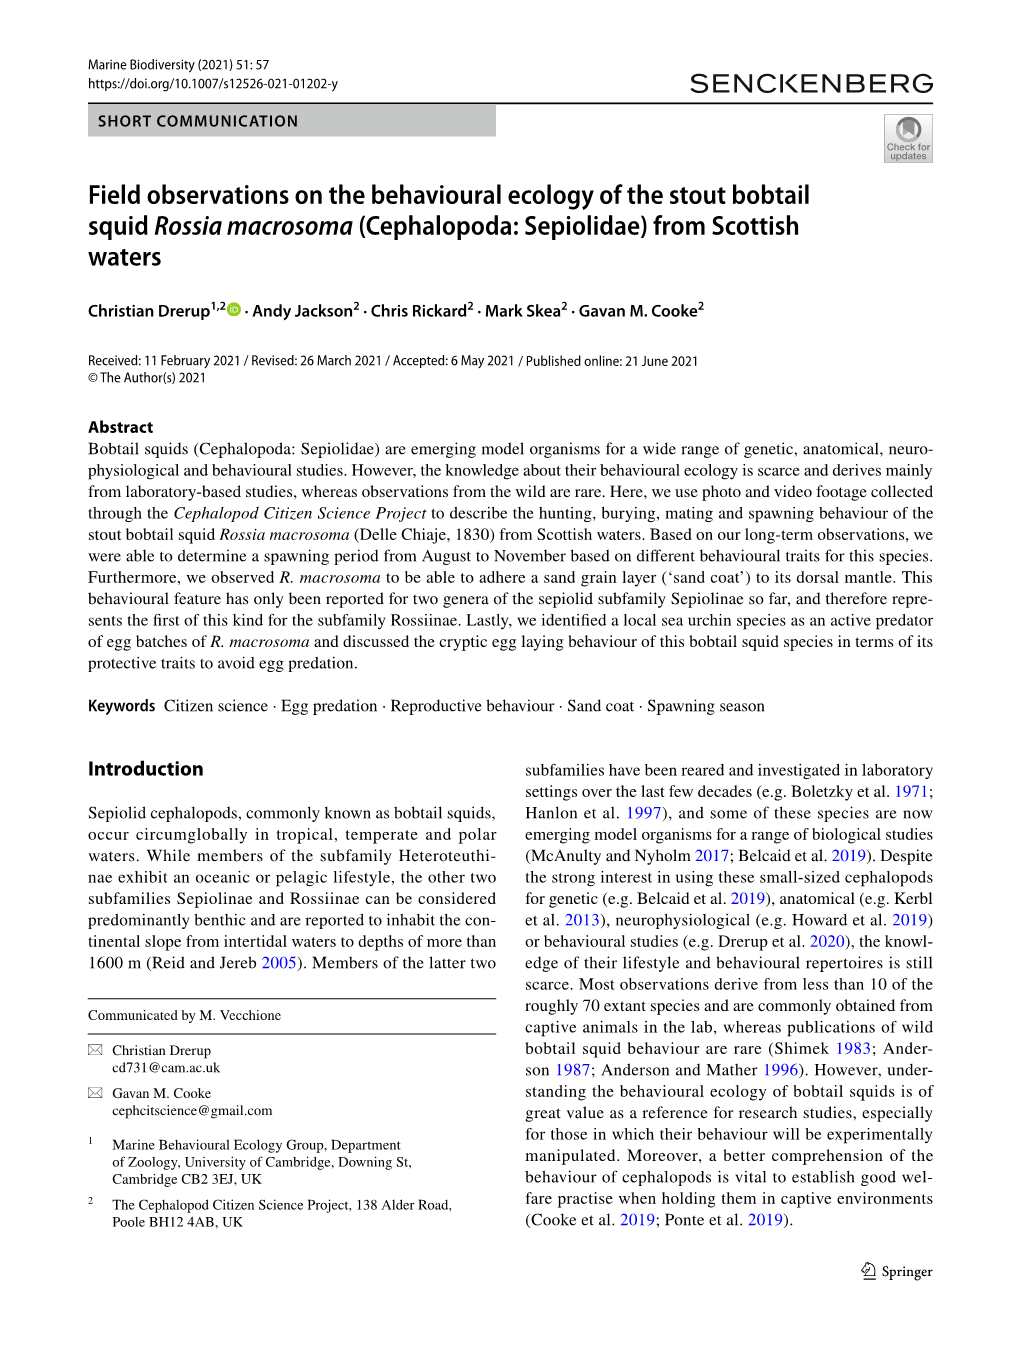 Field Observations on the Behavioural Ecology of the Stout Bobtail Squid Rossia Macrosoma (Cephalopoda: Sepiolidae) from Scottish Waters